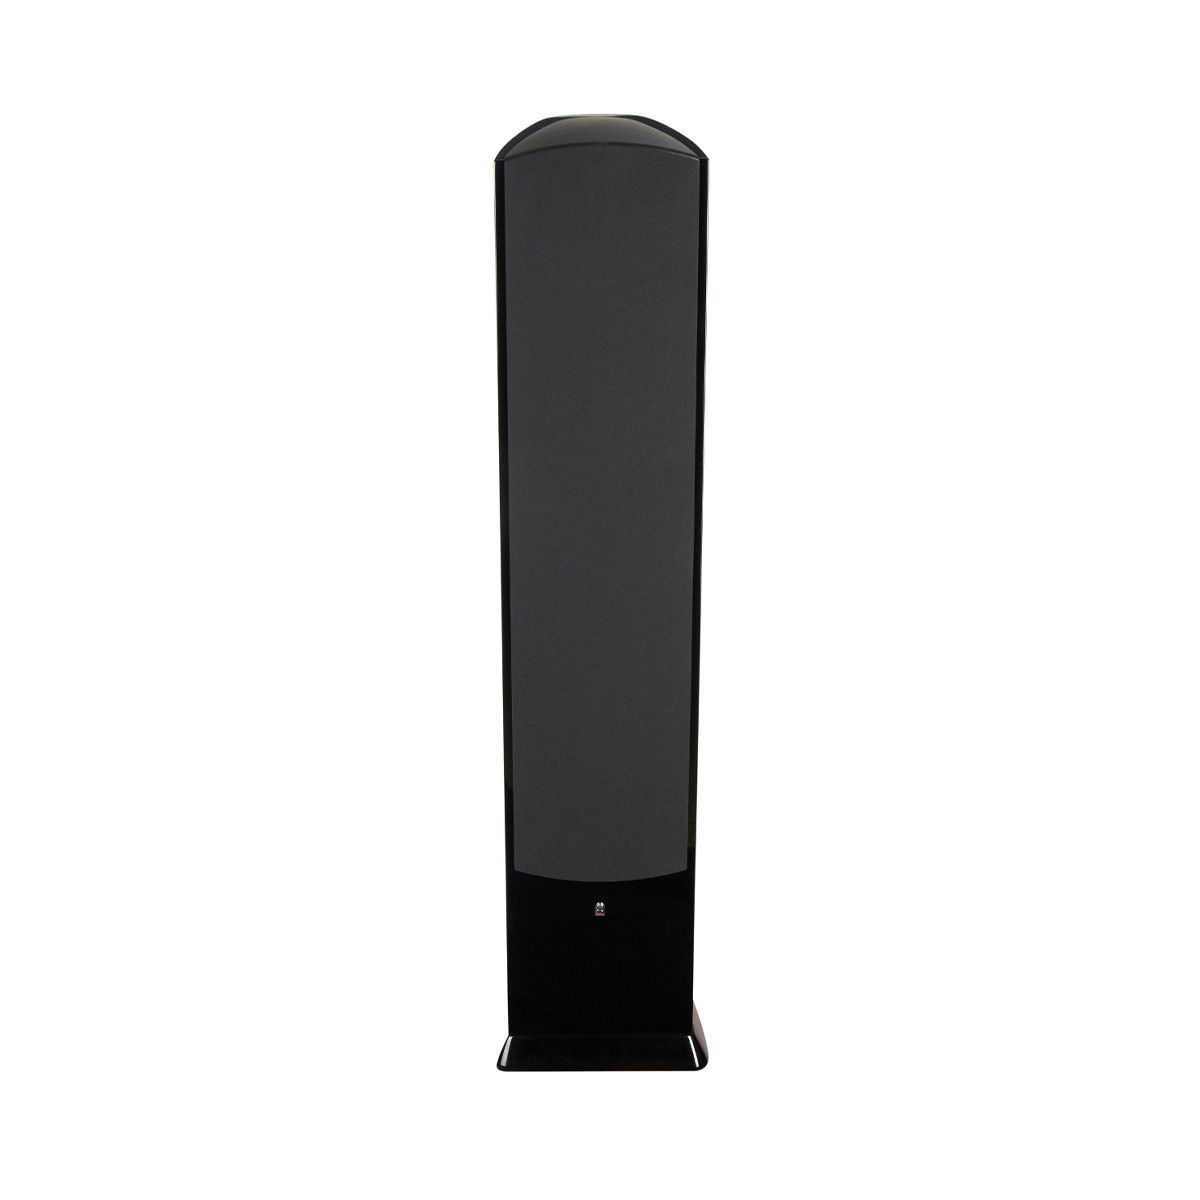 Revel F206 3-Way Floorstanding Tower Loudspeaker - Black single with grille - front view